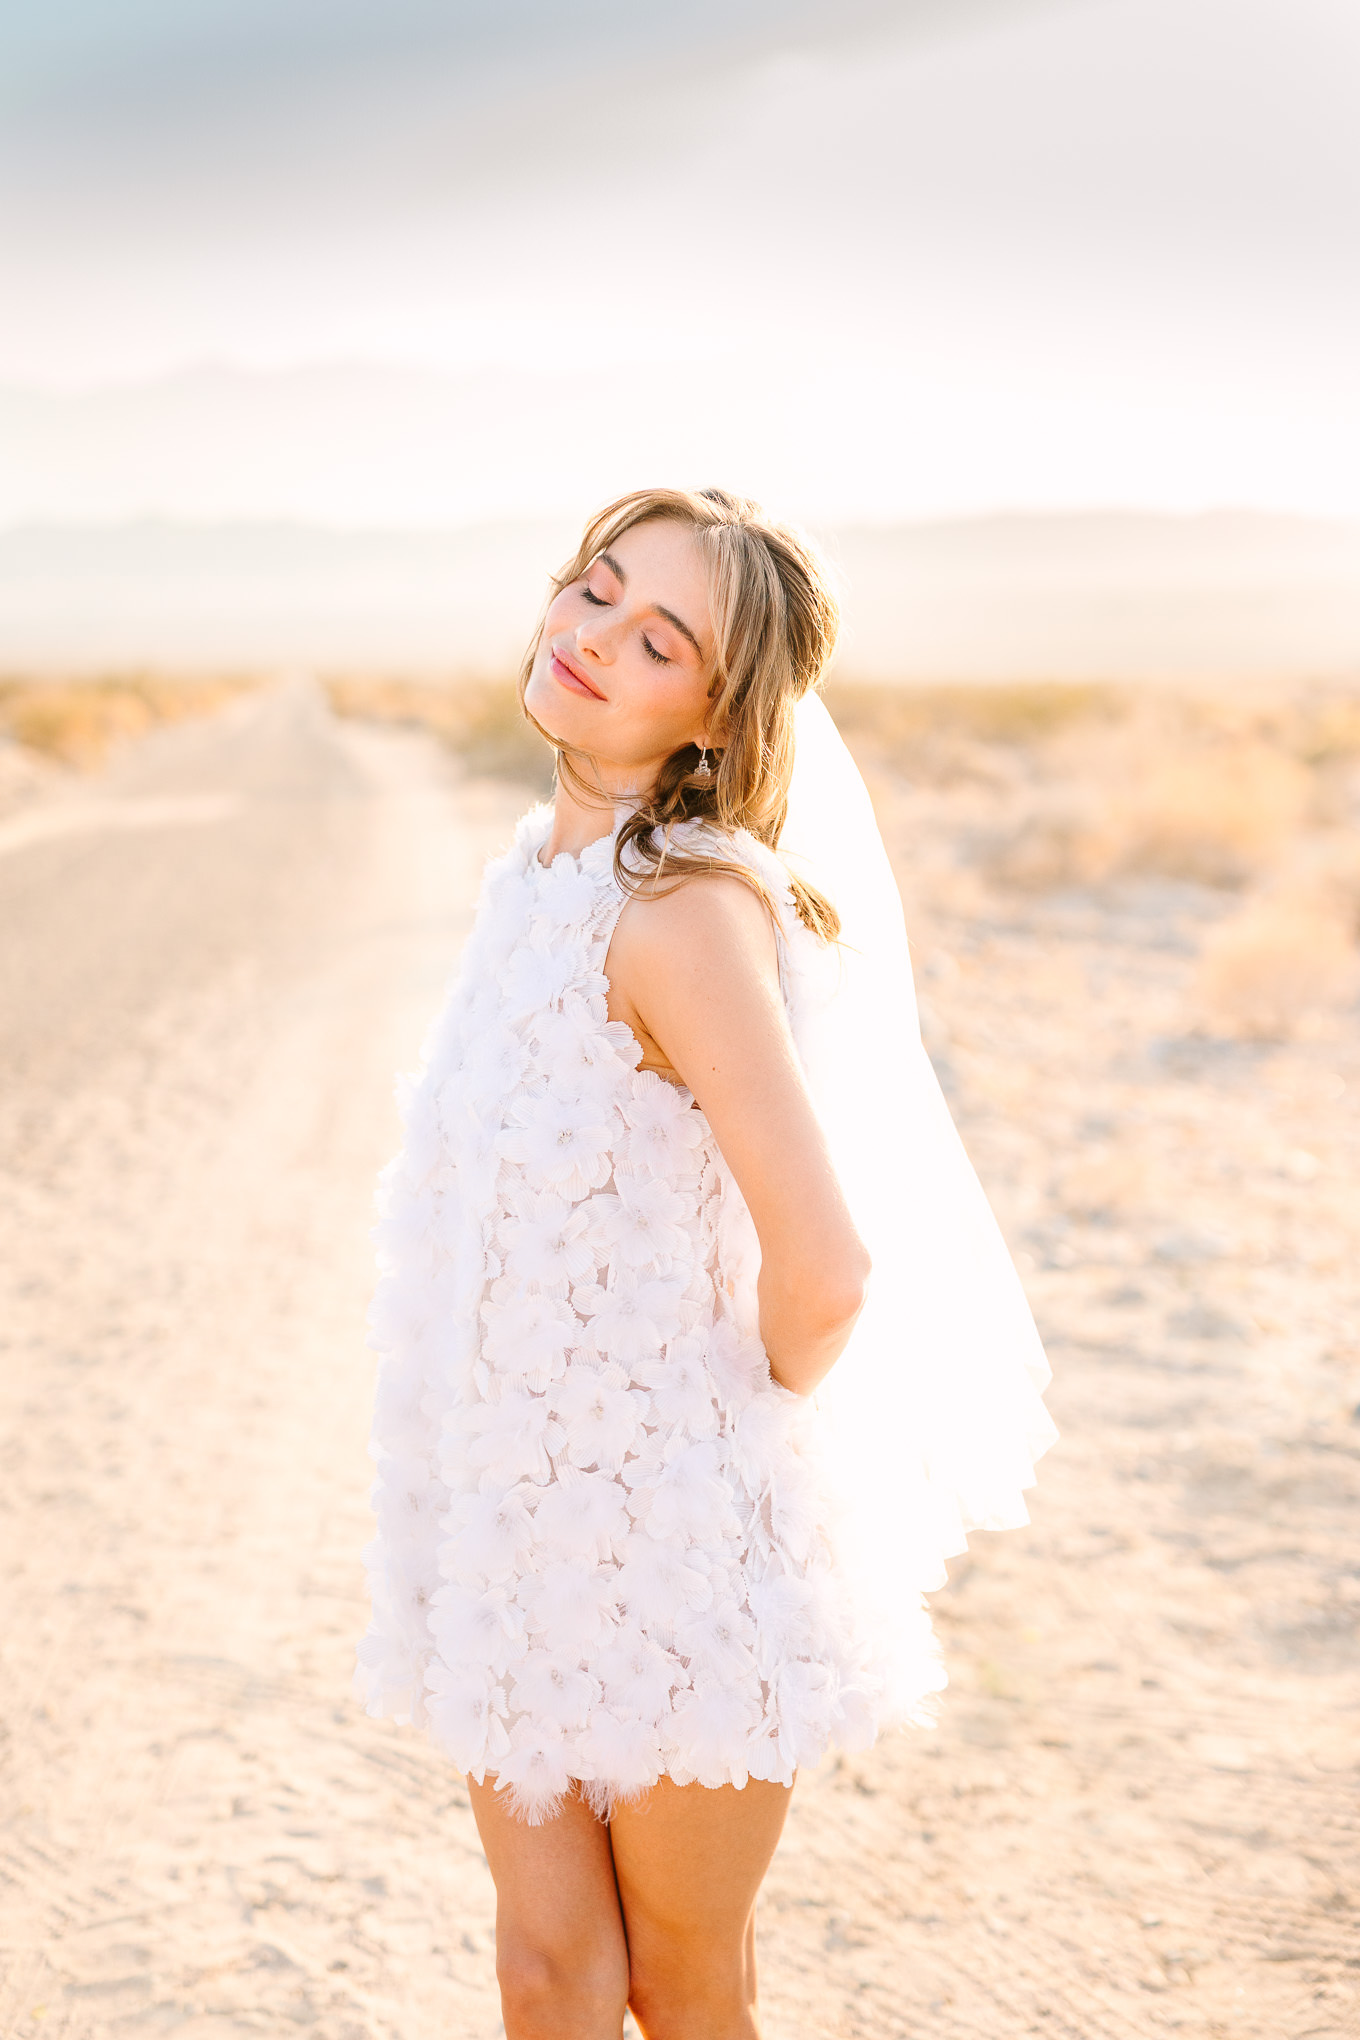 Bridal style with short Naeem Khan feather white dress| Kindred Presets x Mary Costa Photography Palm Springs Ad Campaign | Colorful Palm Springs wedding photography | #palmspringsphotographer #lightroompresets #sandshotel #pinkhotel   Source: Mary Costa Photography | Los Angeles